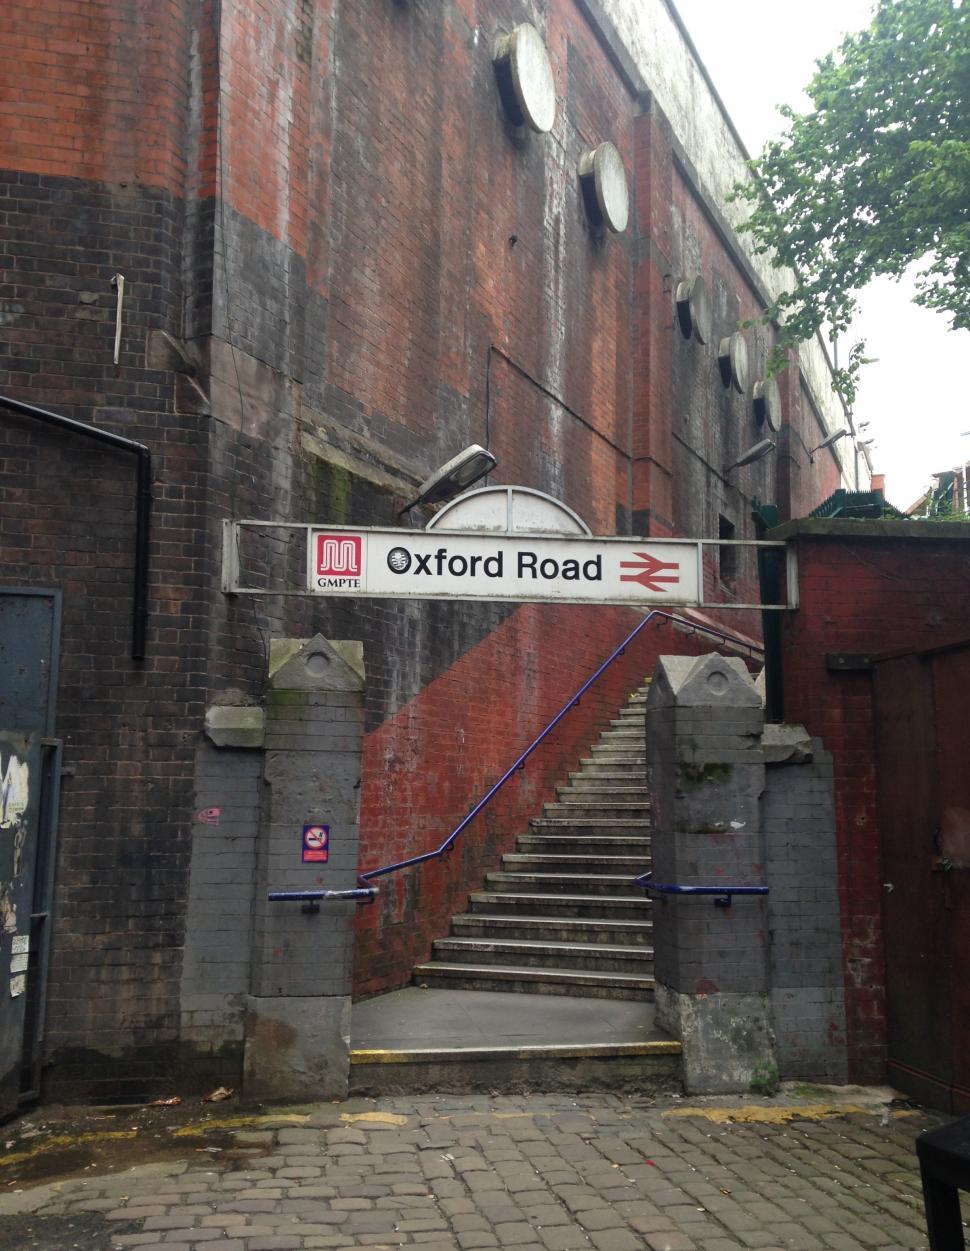 Free Image of Rear Entrance to Manchester Oxford Road Railway Station  